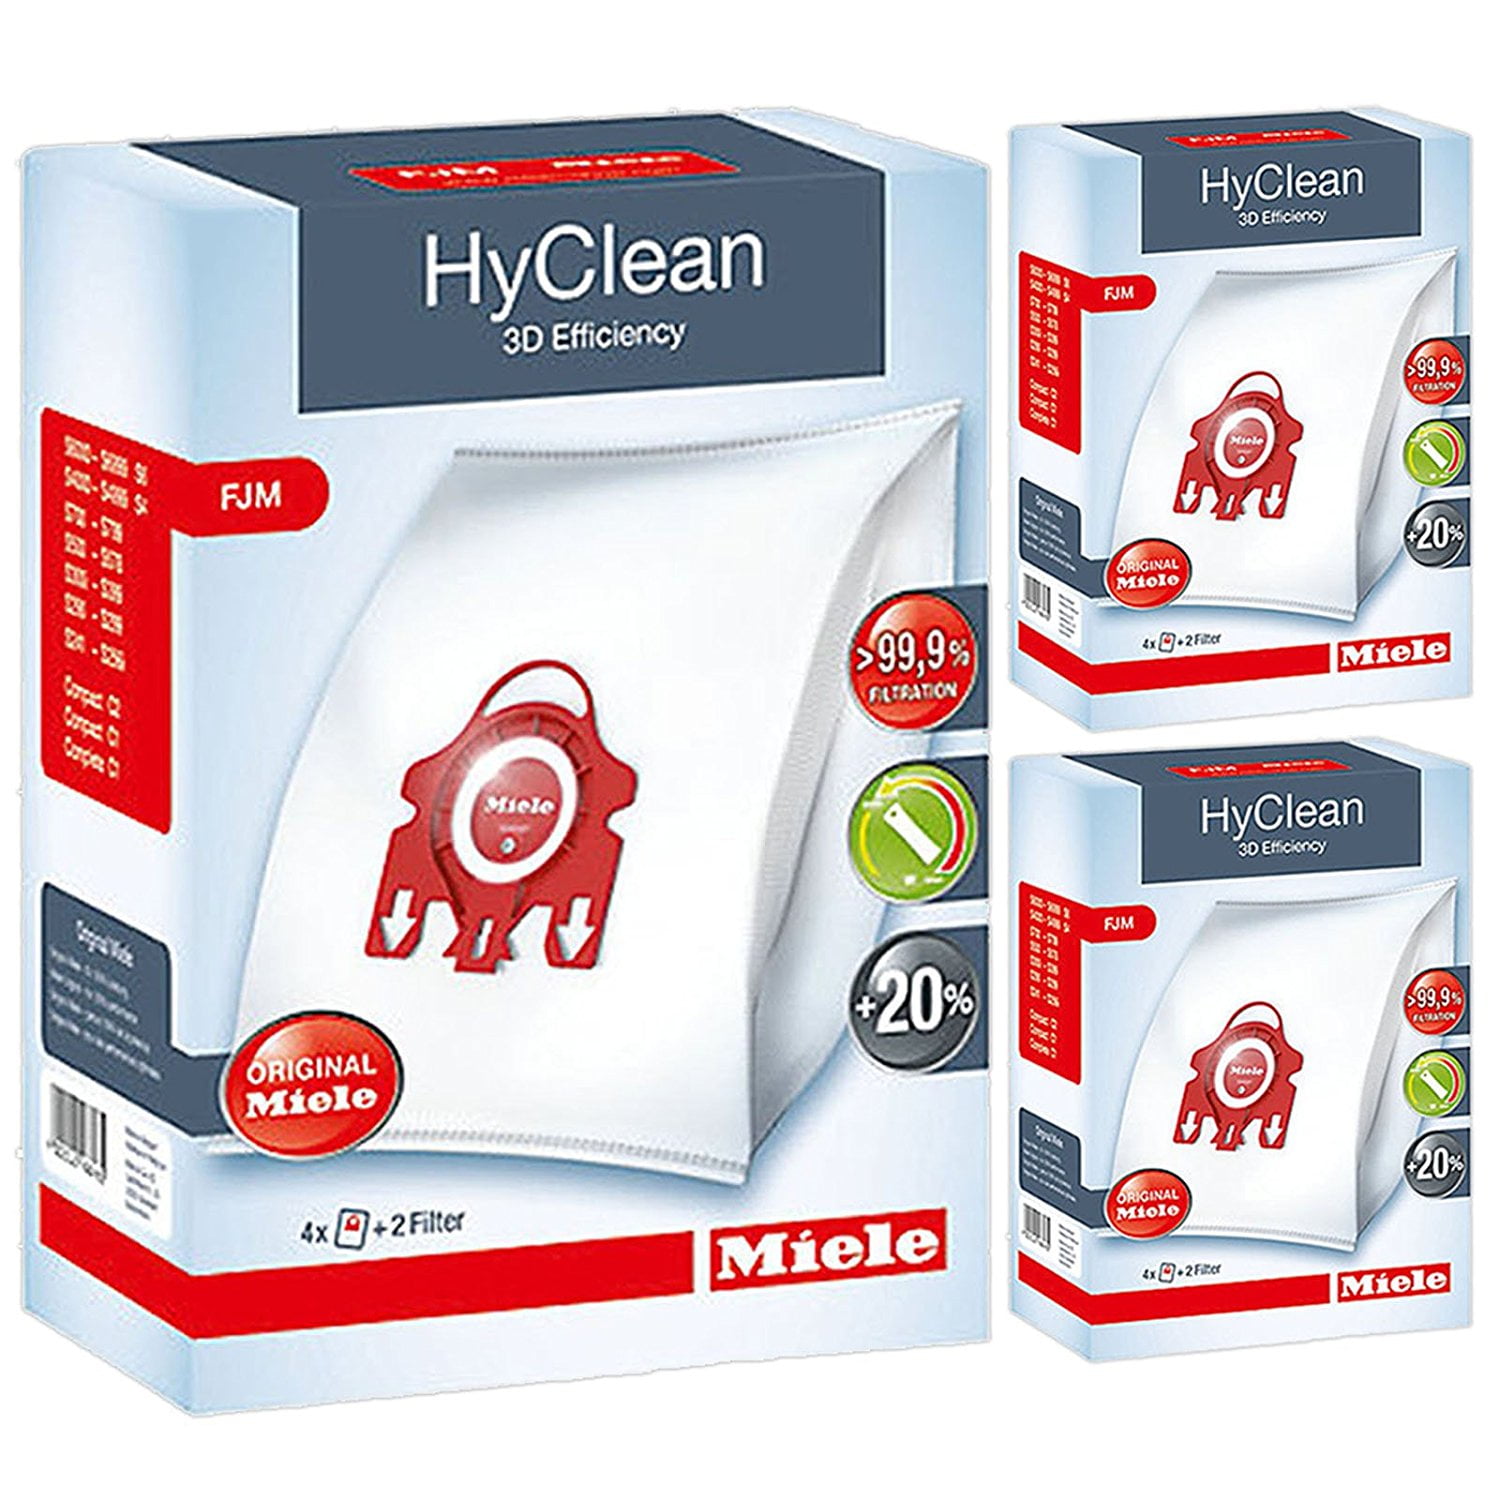 MIELE GENUINE FJM HYCLEAN 3D EFFICIENCY VACUUM BAGS YOUNG STY FILTERS 4 BOXES 